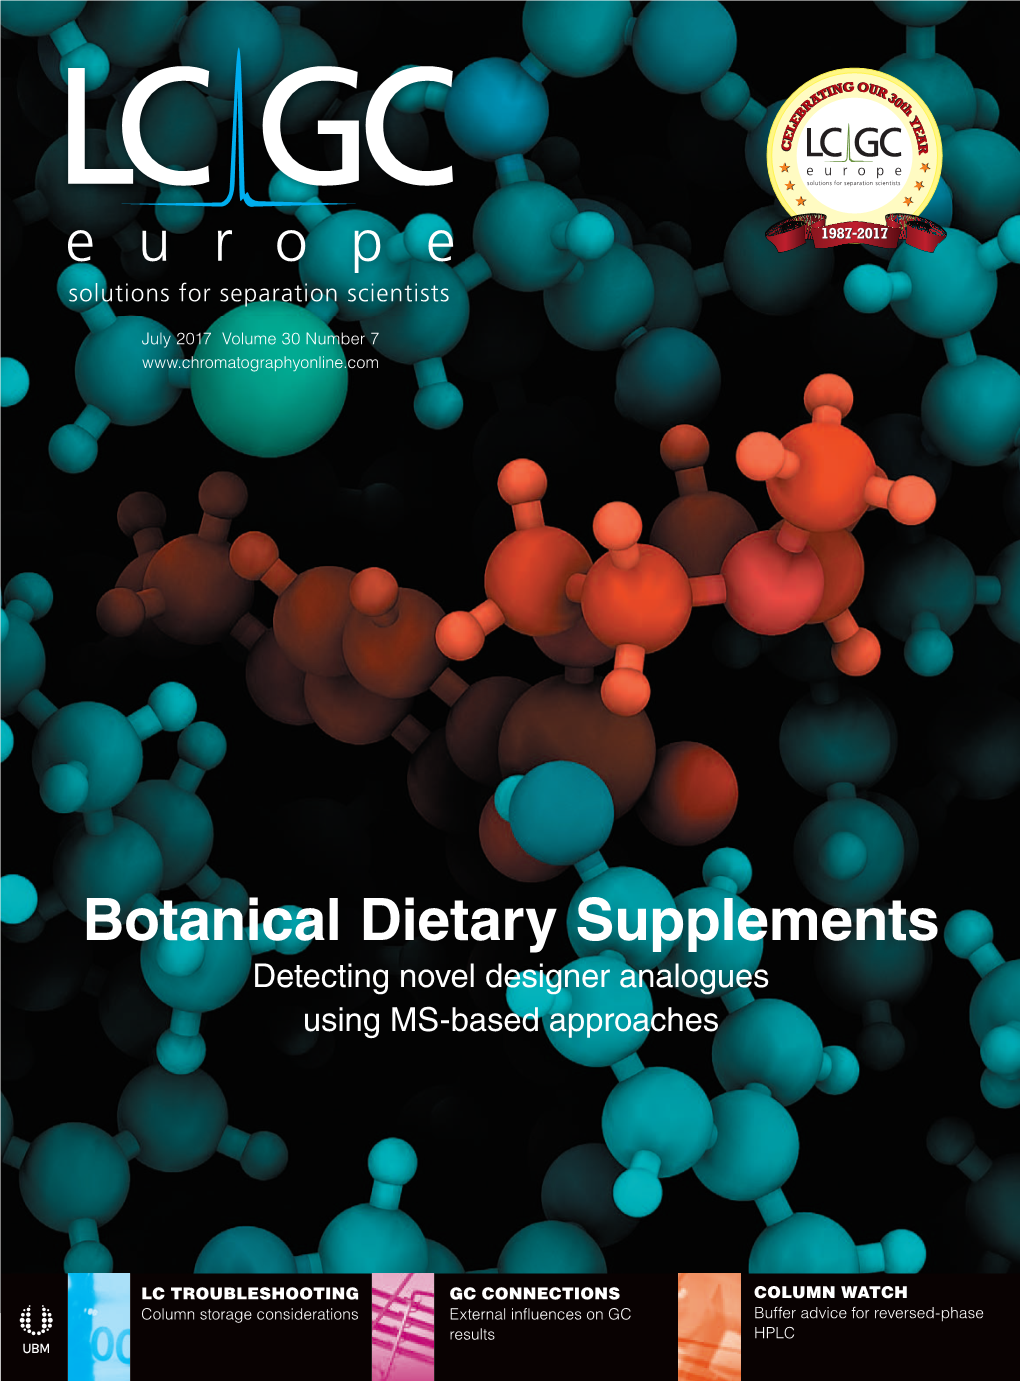 Botanical Dietary Supplements Detecting Novel Designer Analogues Using MS-Based Approaches